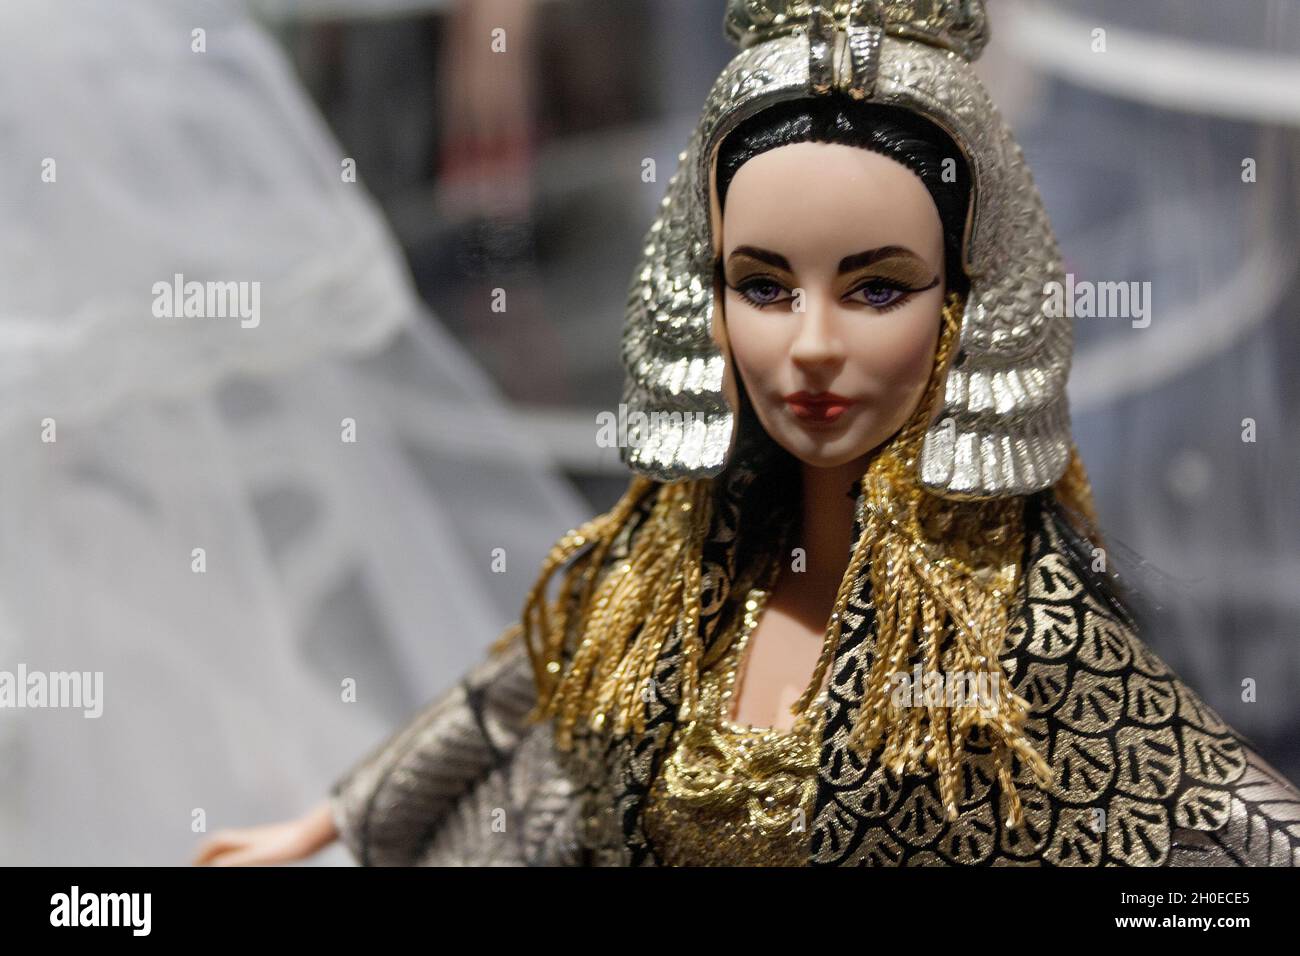 Elizabeth Taylor in Cleopatra, Barbie The Icon exposition at Mudec museum in Milan, Italy Stock Photo